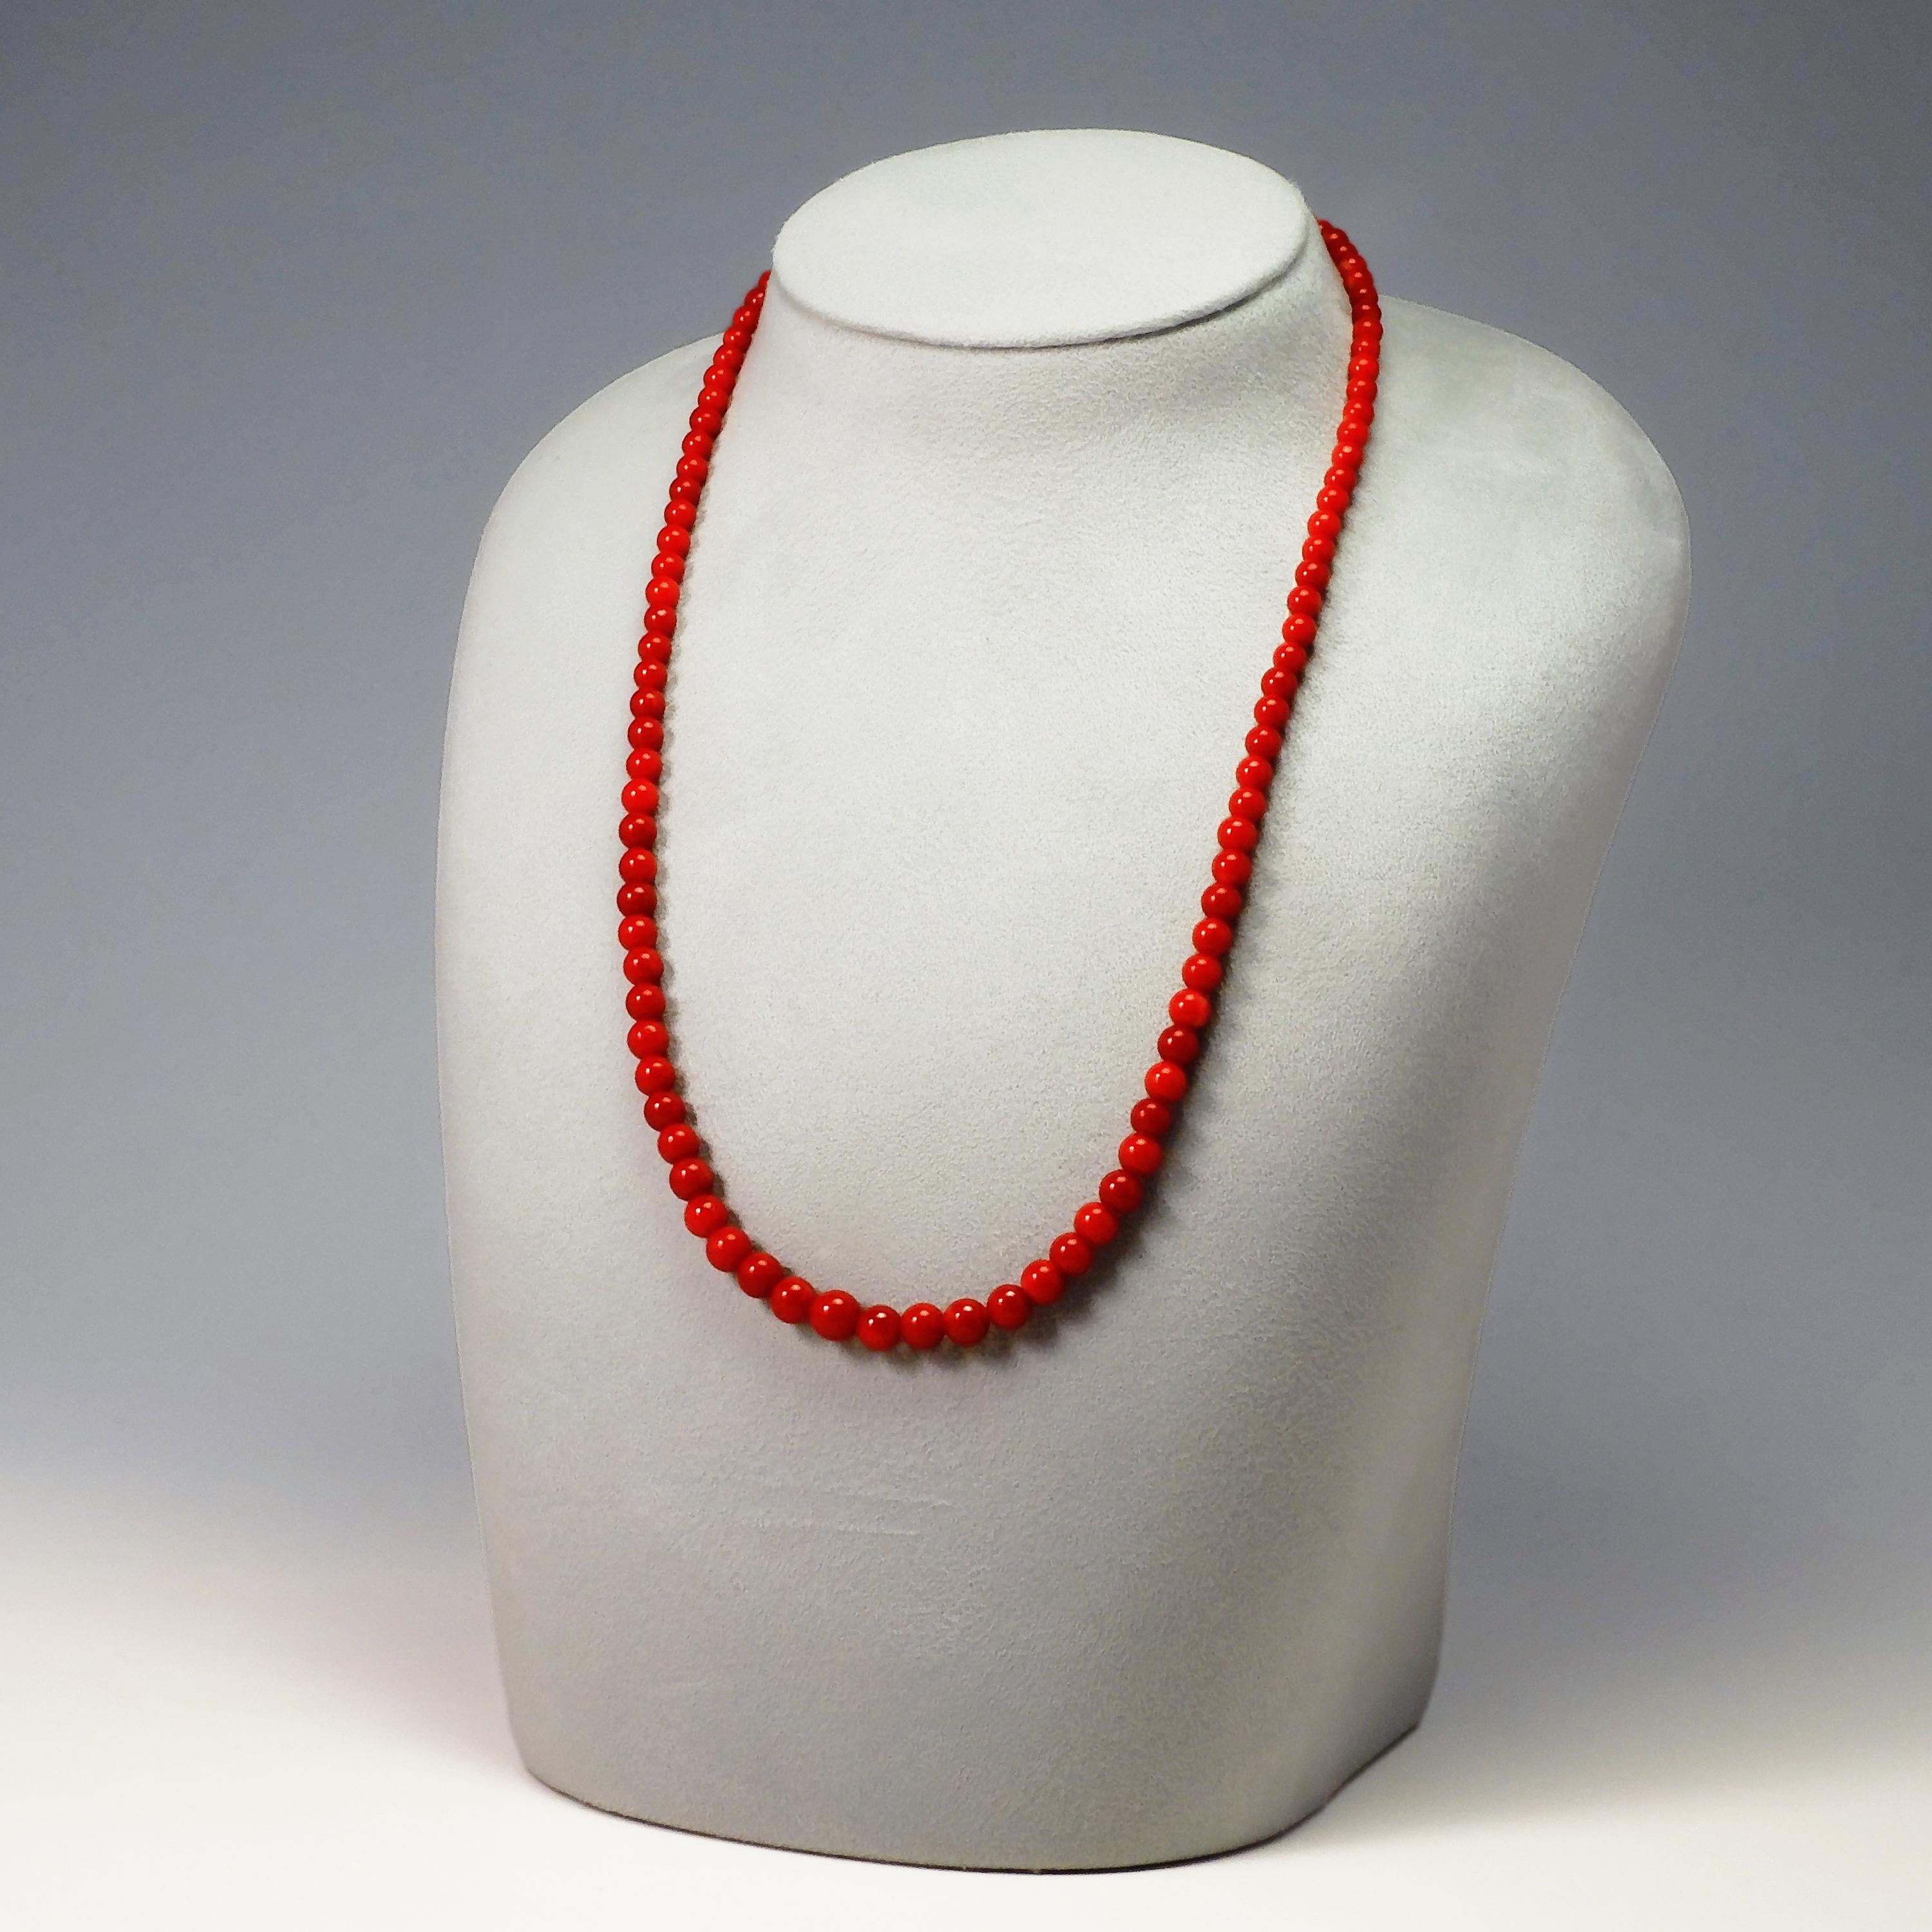 14 Karat White Gold Japanese Red Coral Graduated Beads Necklace For Sale 1